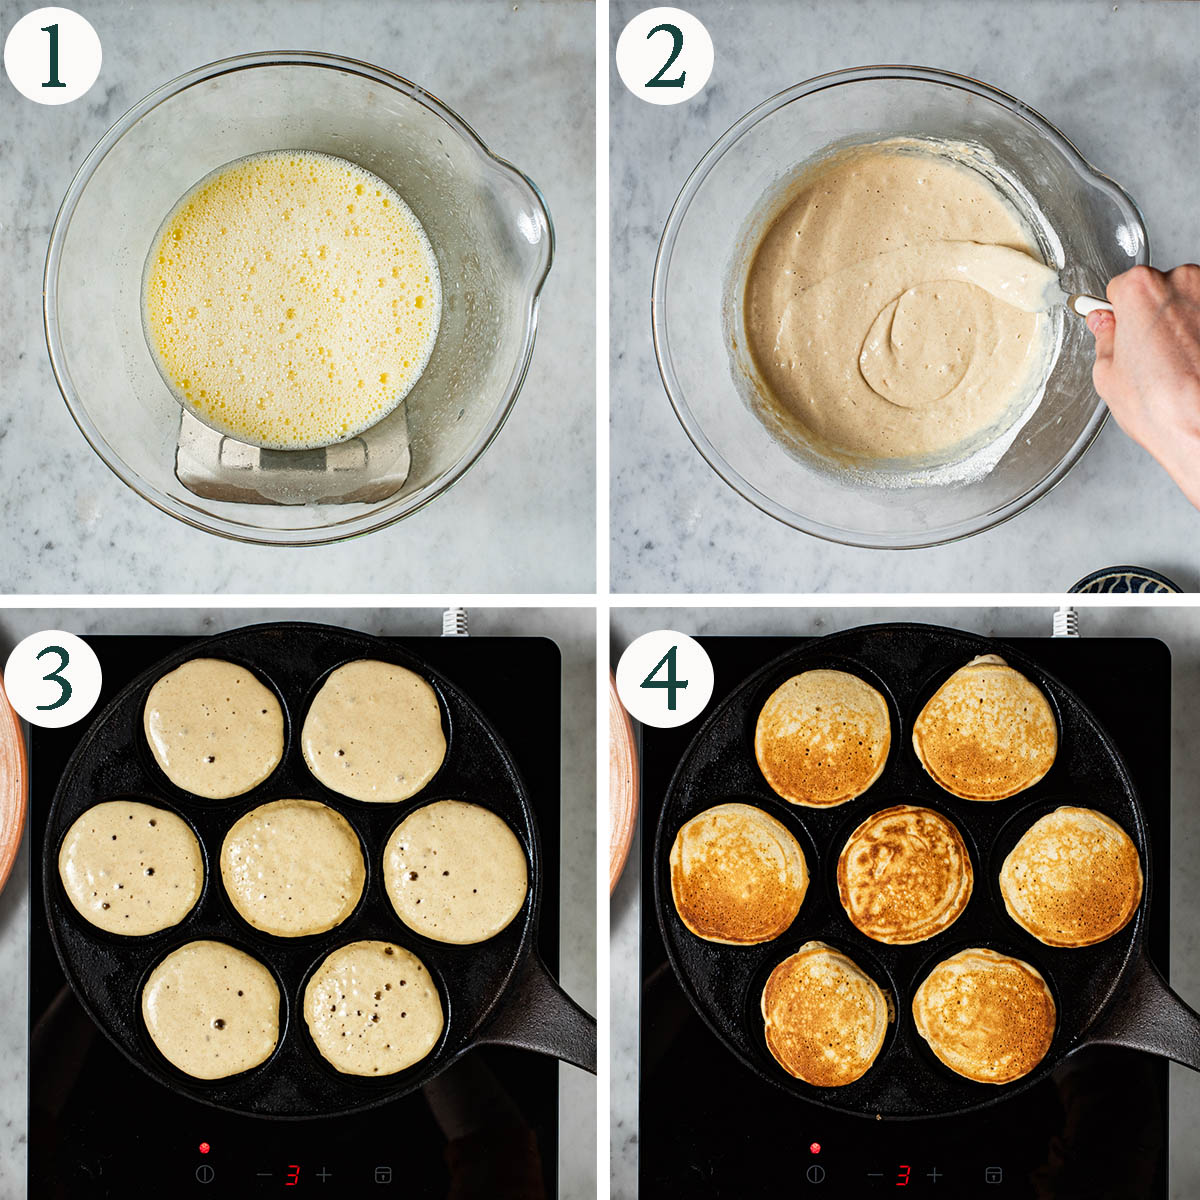 Drop scones steps 1 to 4, mixed batter and pancakes cooking in the pan.